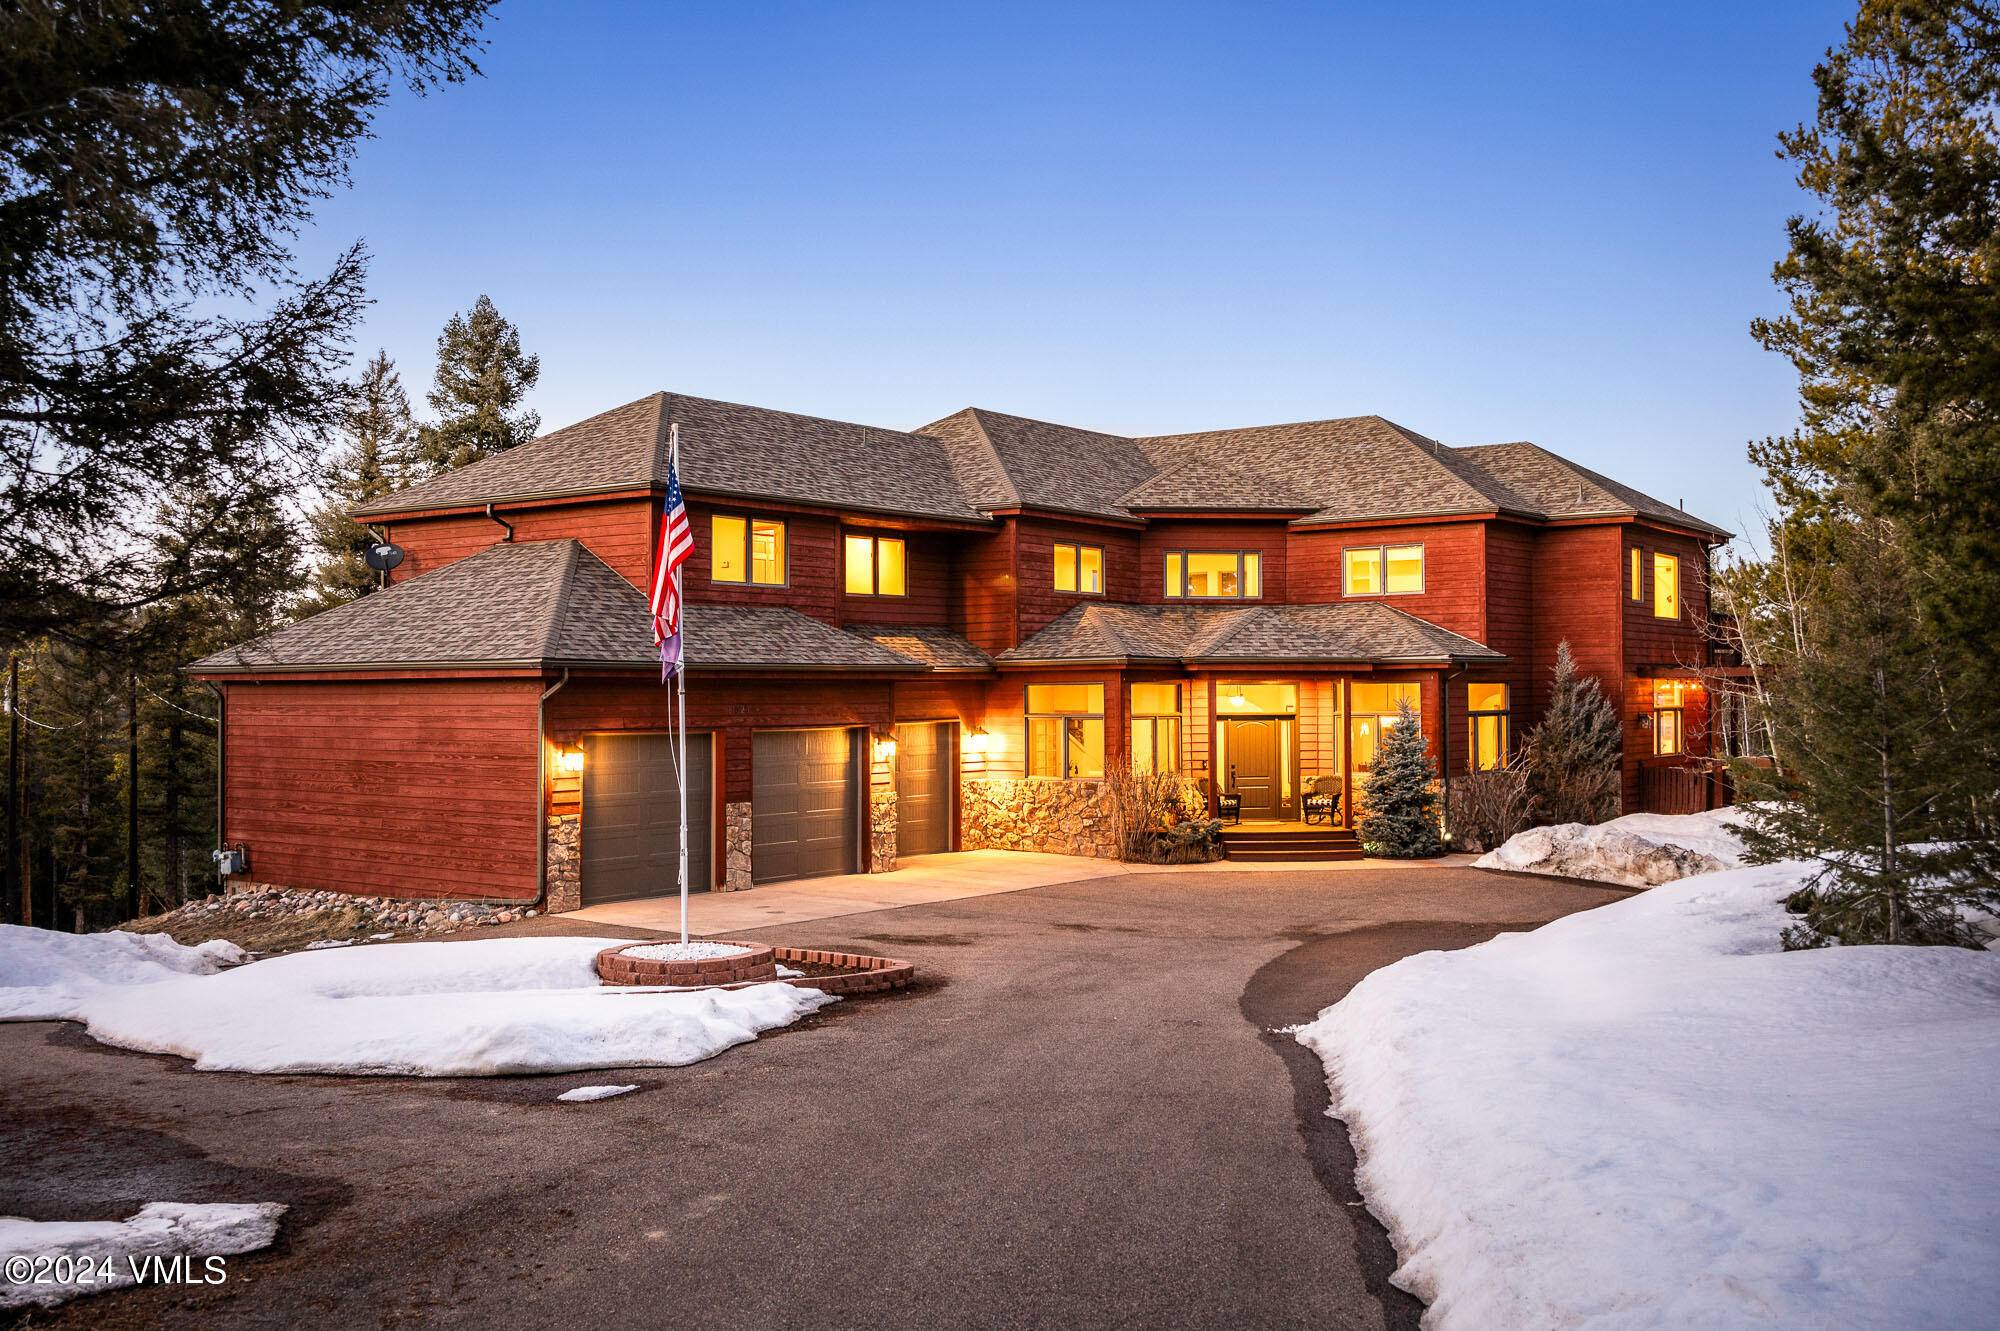 Nestled in the heart of Conifer's highly coveted mountain community, this custom built contemporary home offers unparalleled luxury living amidst 10 acres of breathtaking natural beauty.